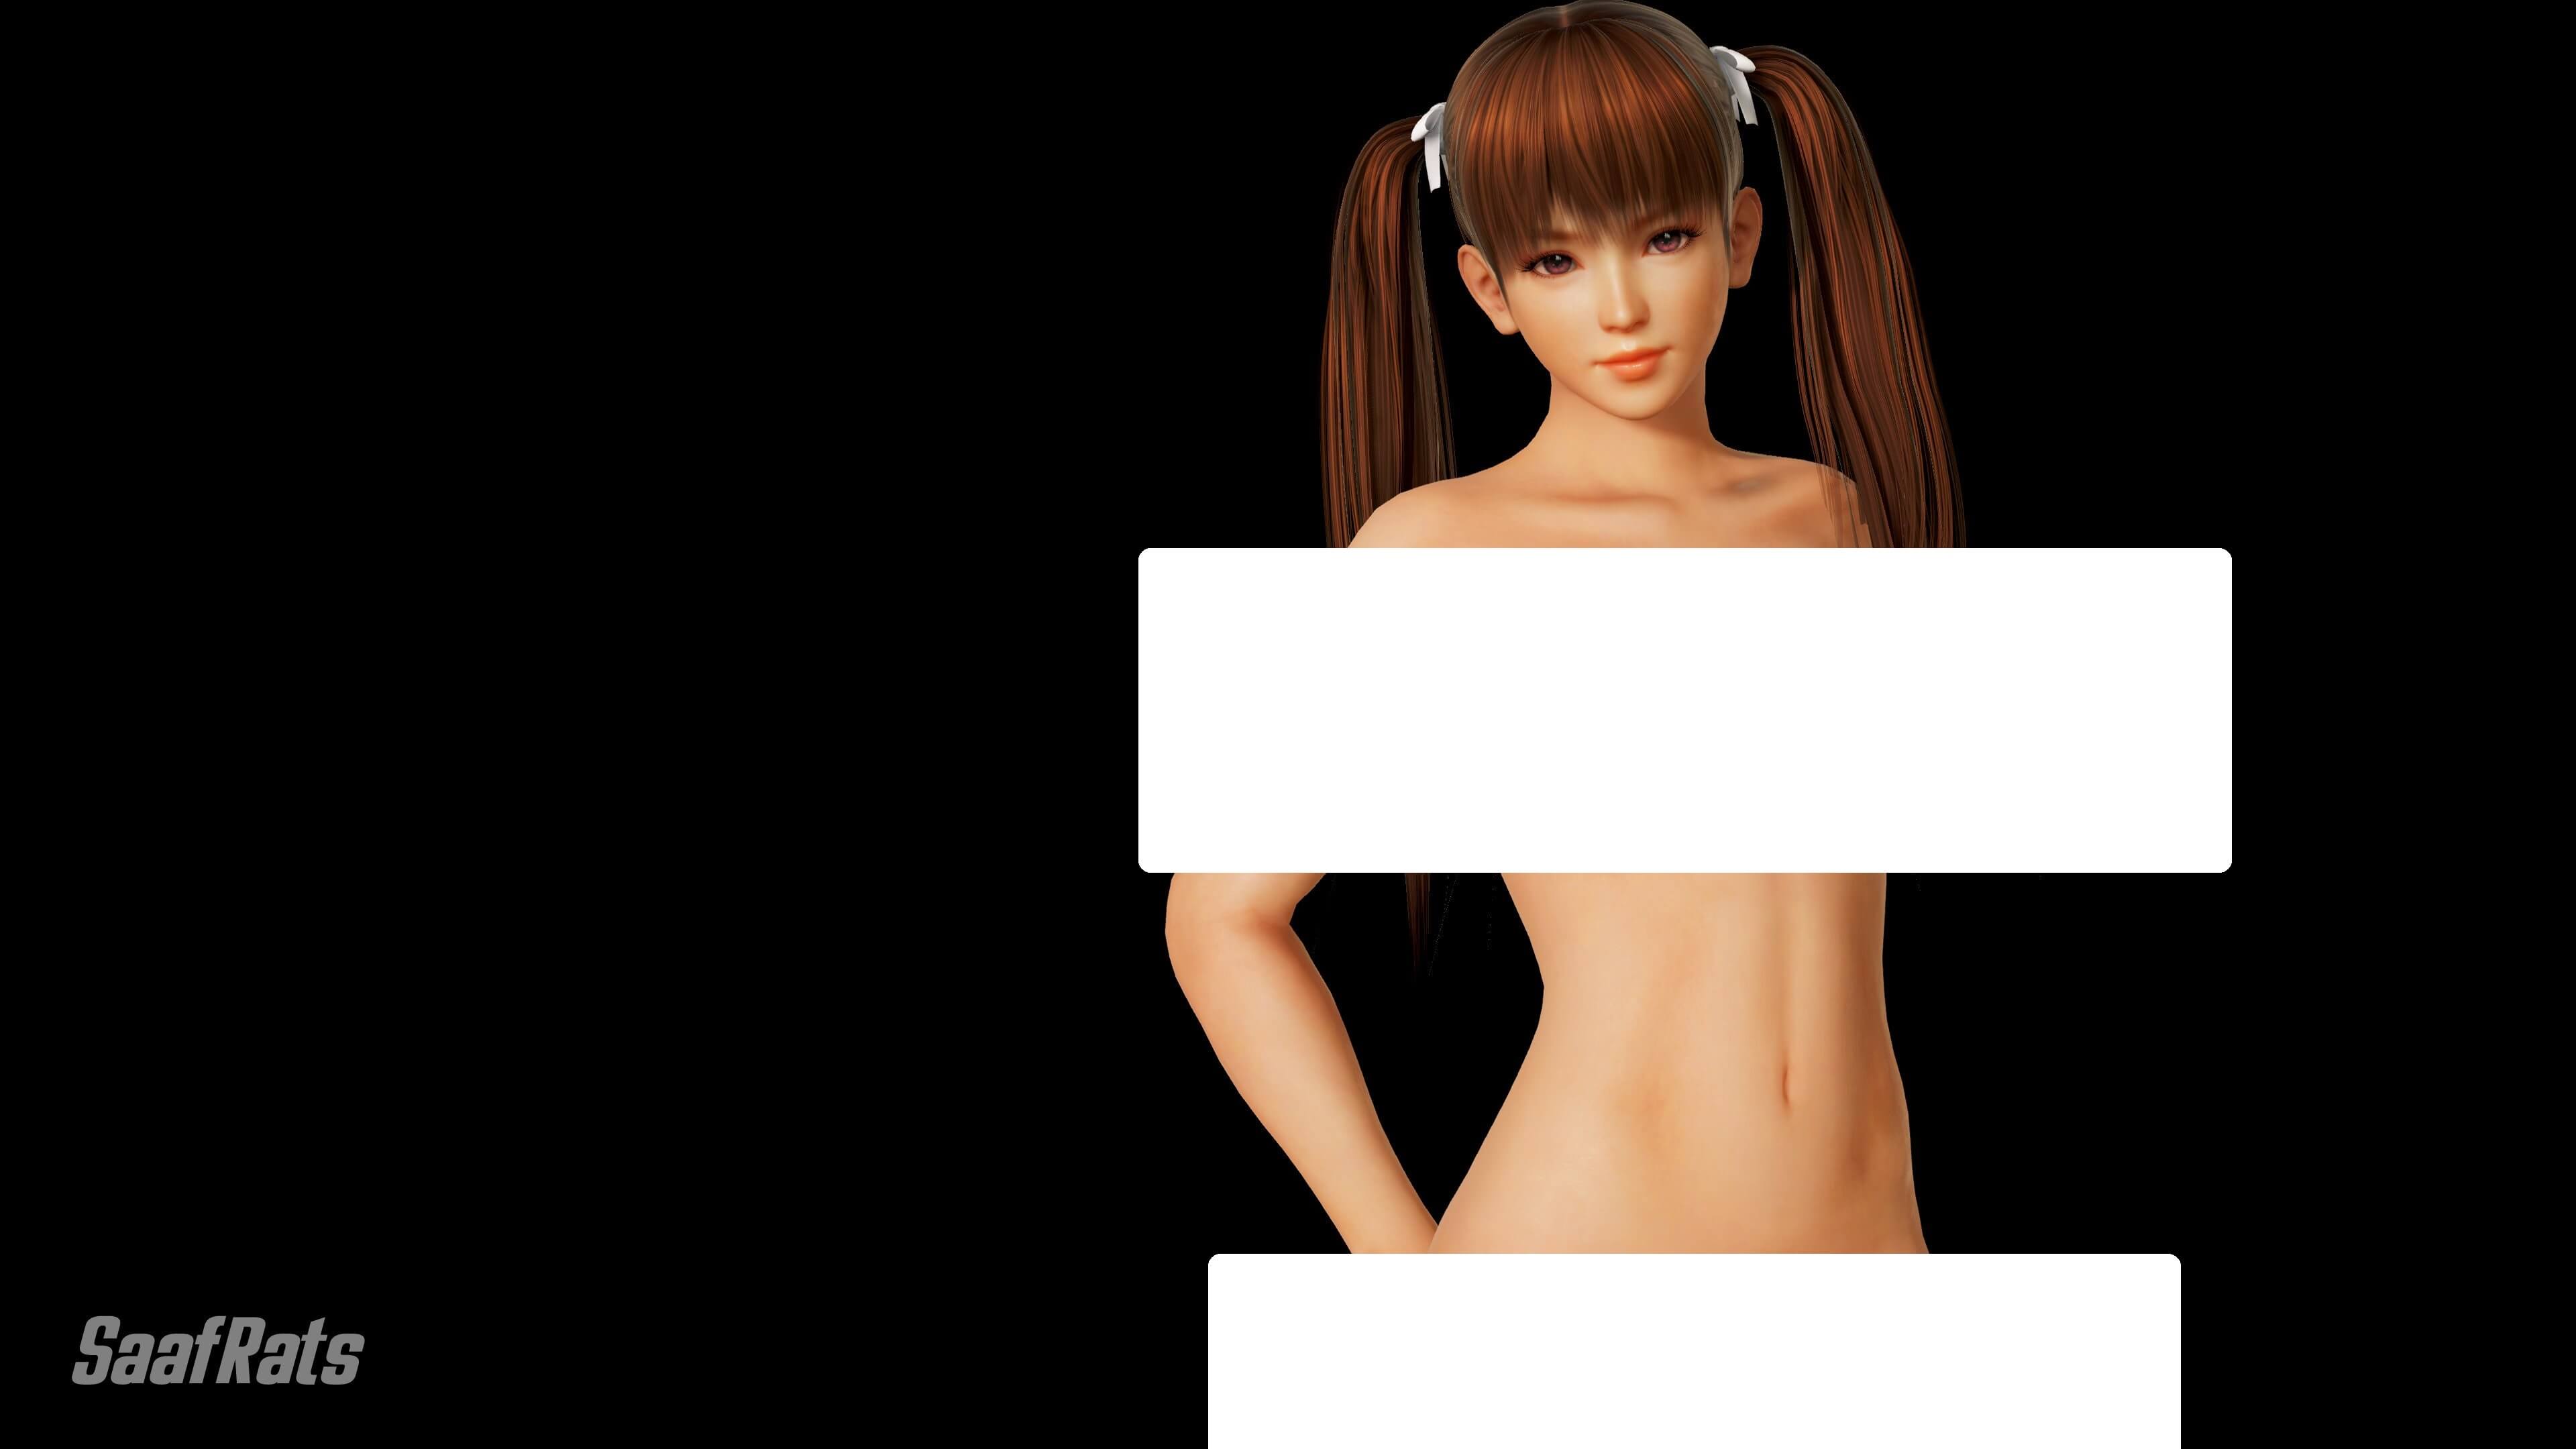 First full mod released for Dead or Alive 6, featuring soft boobs physics